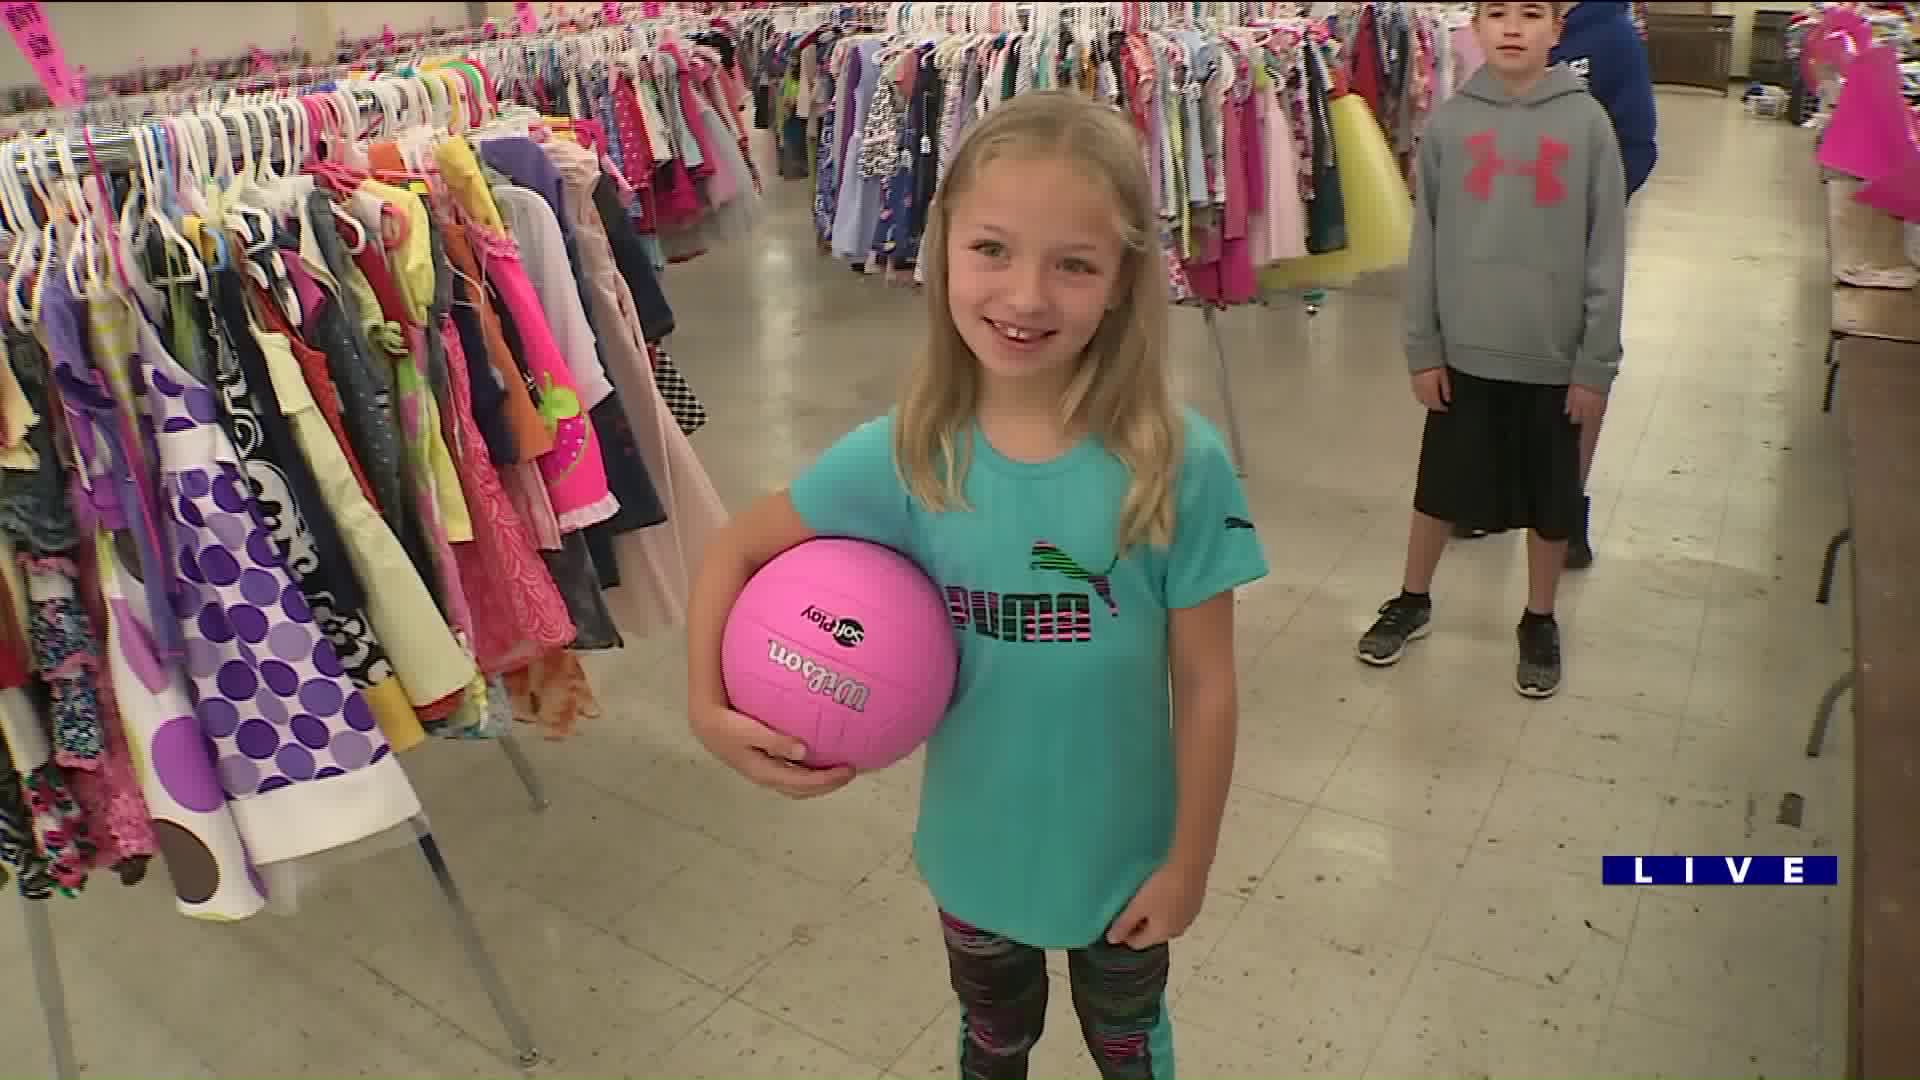 Around Town checks out Rhea Lana’s Children’s Consignment Sale